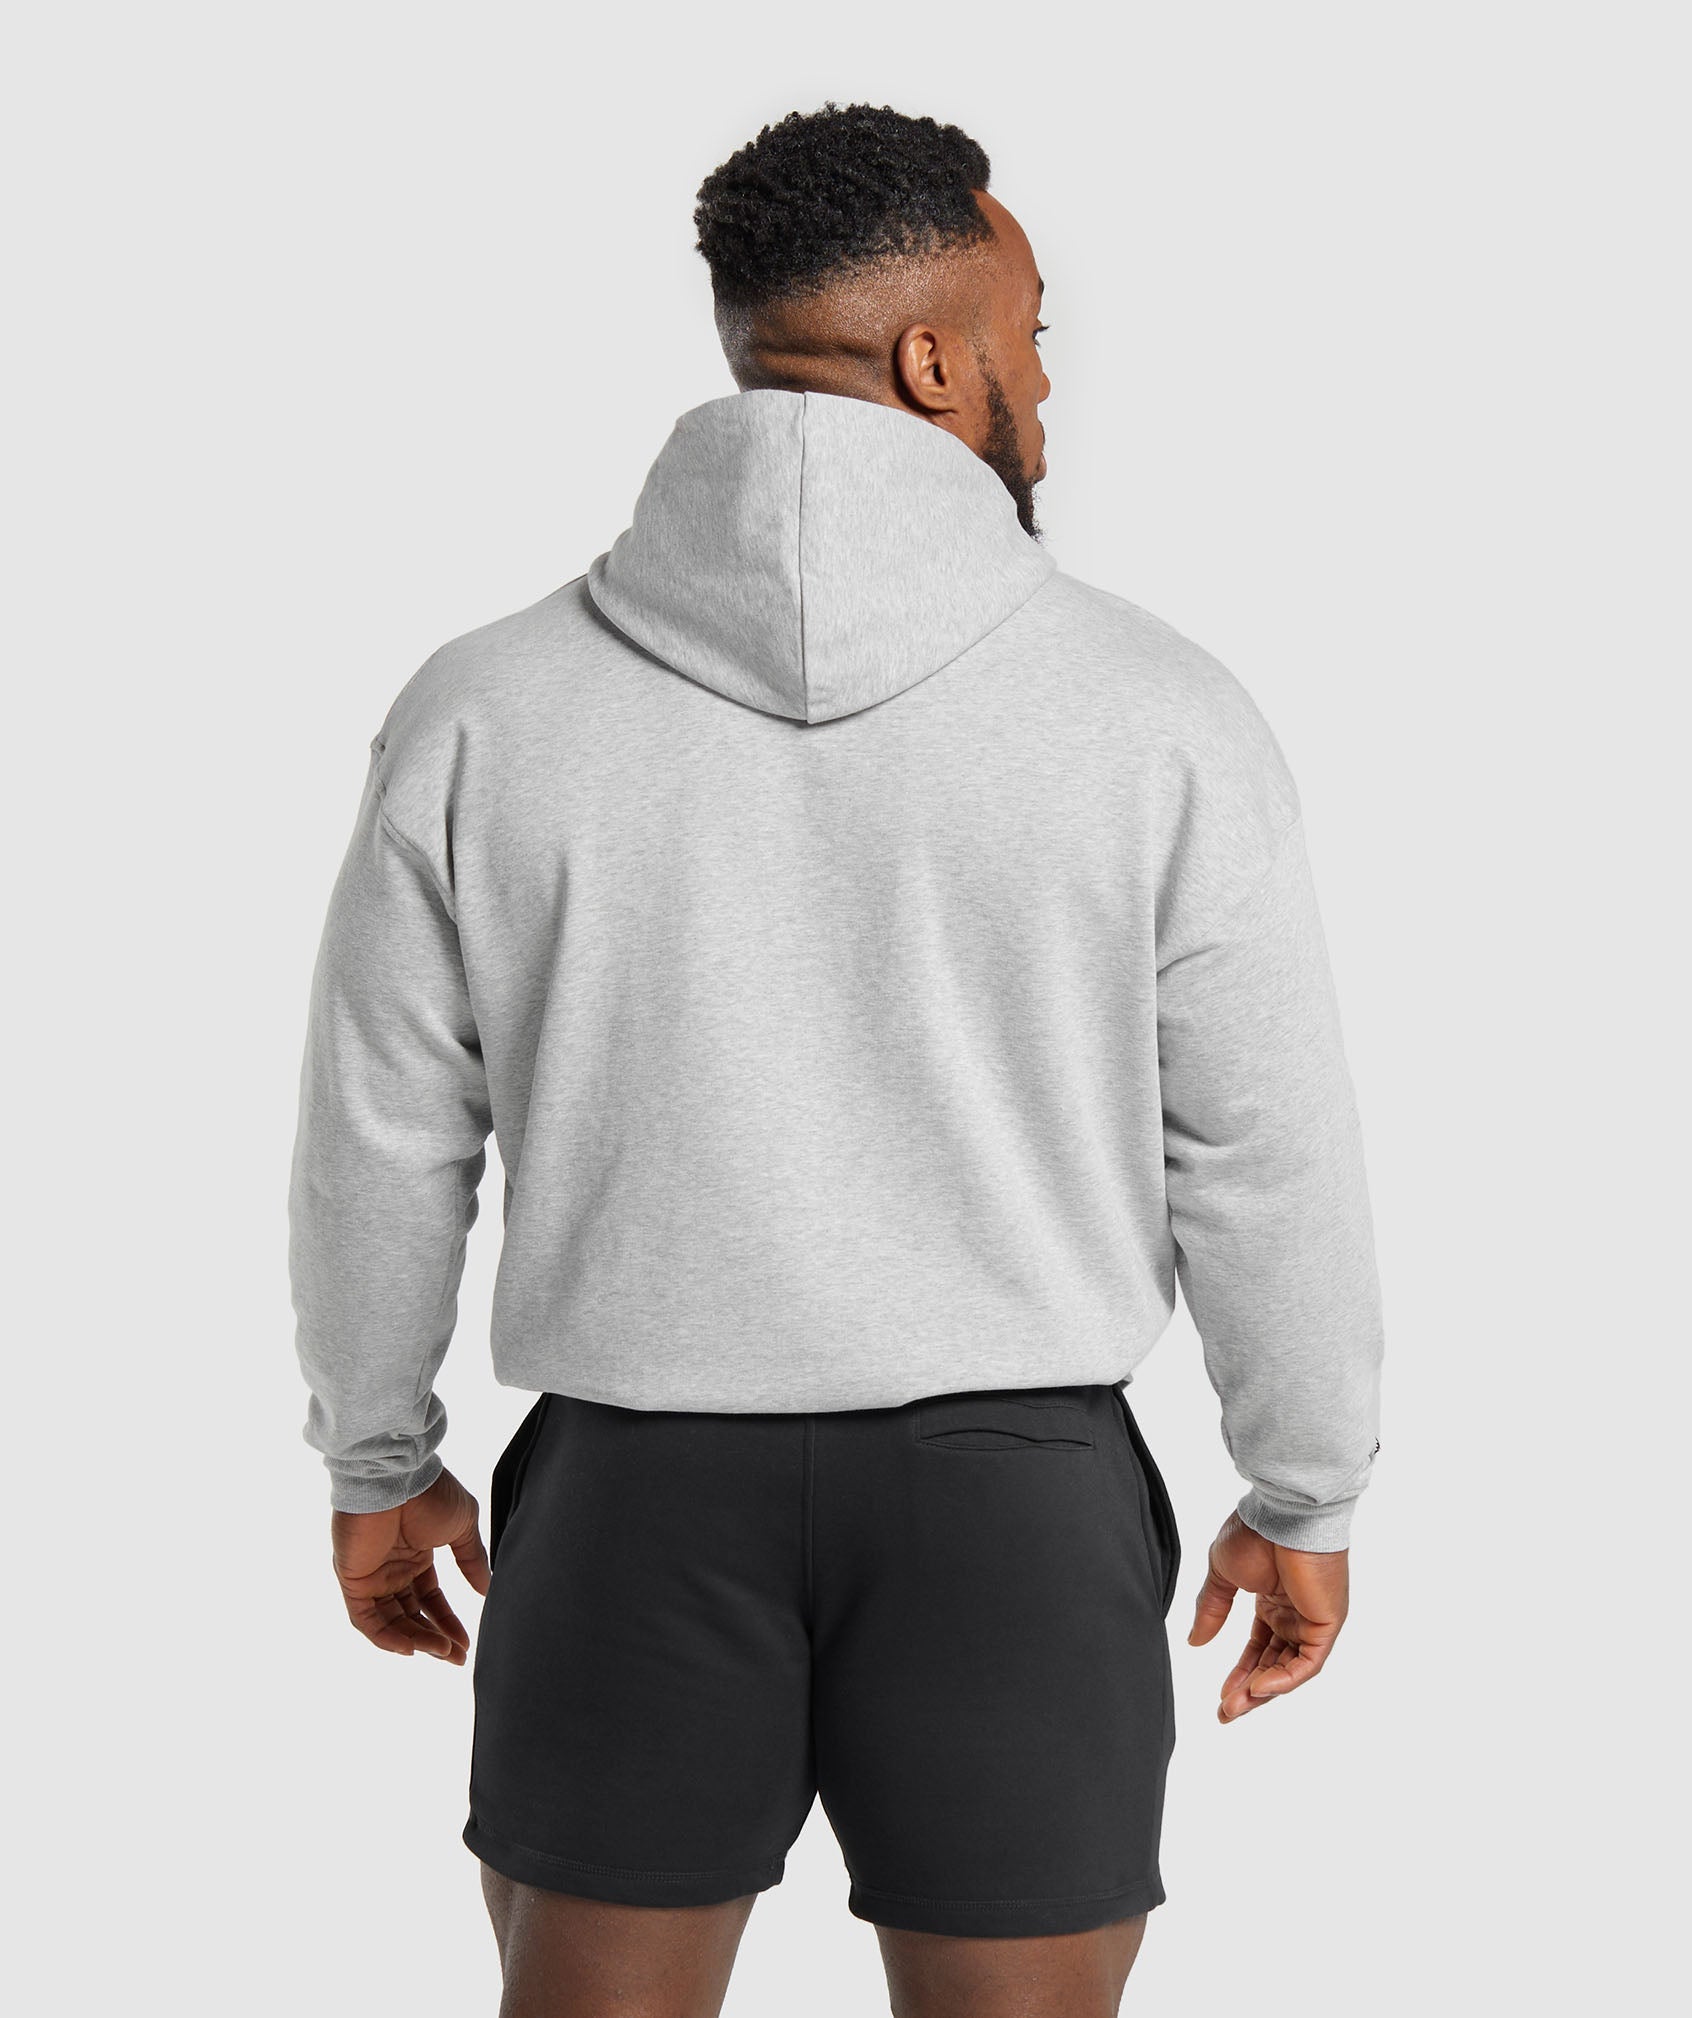 Property Of Hoodie in Light Grey Core Marl - view 2